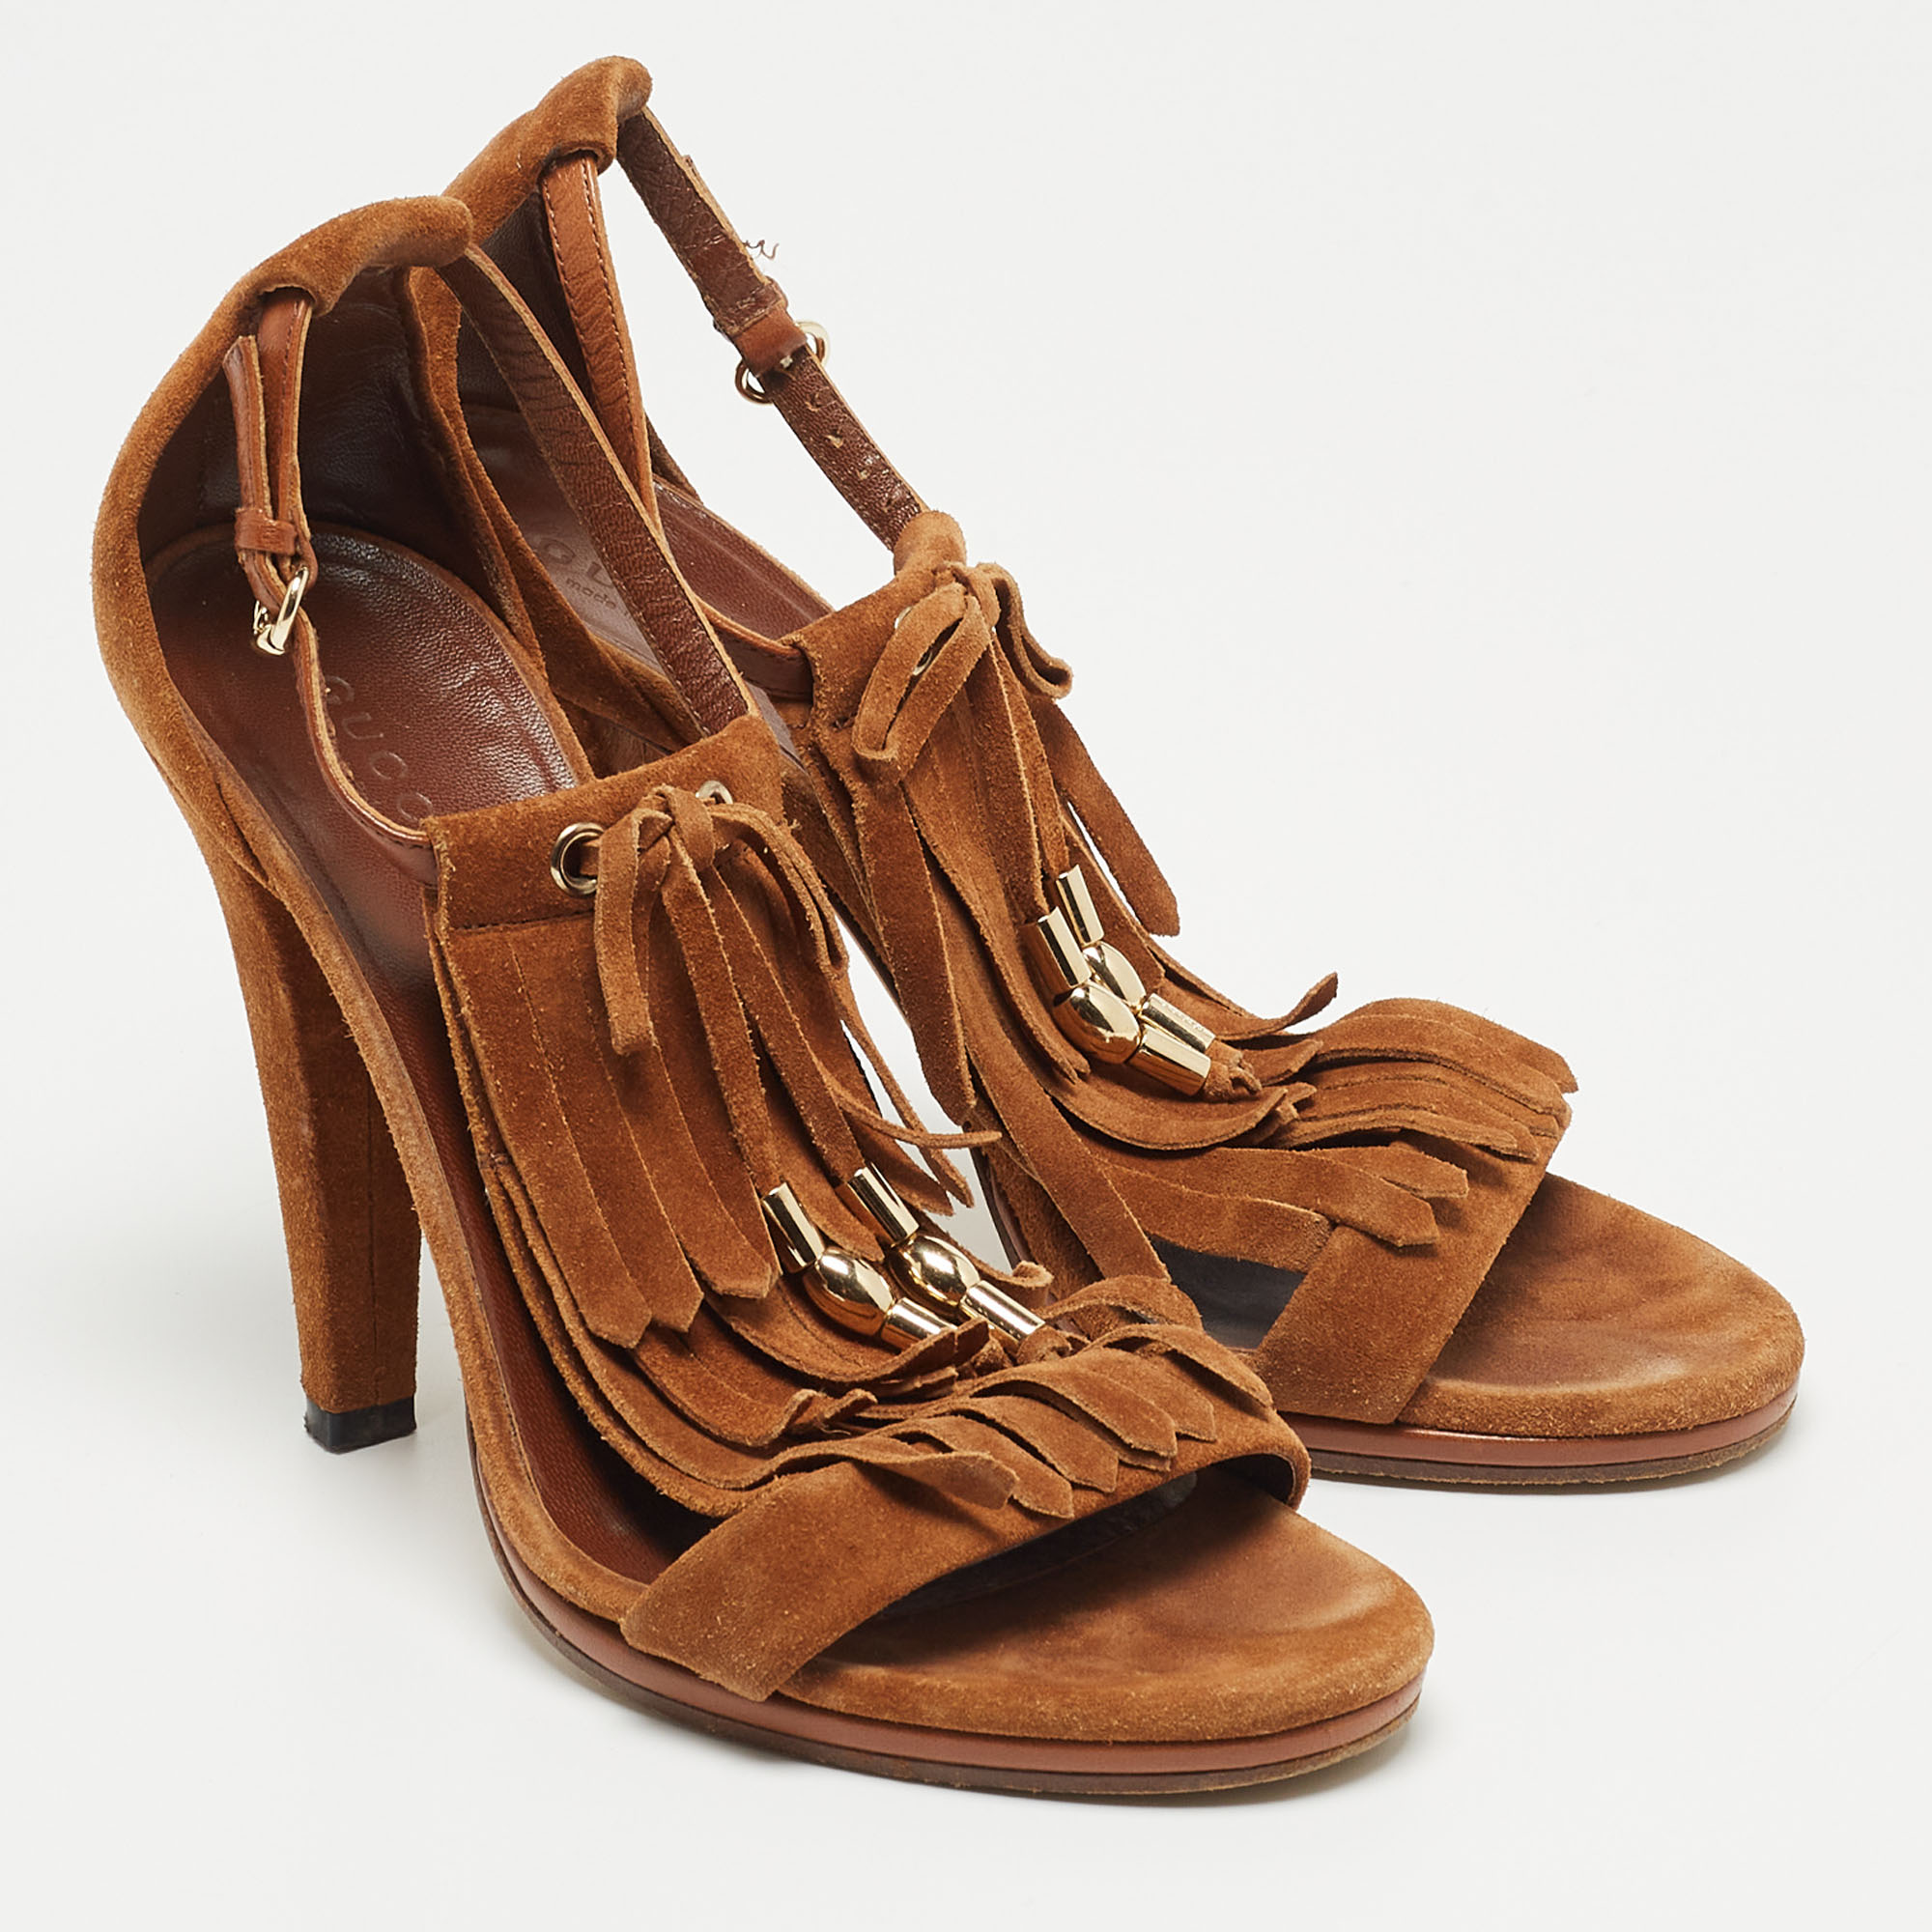 Gucci Brown Suede Fringe Bow Ankle Strap Sandals Size 36